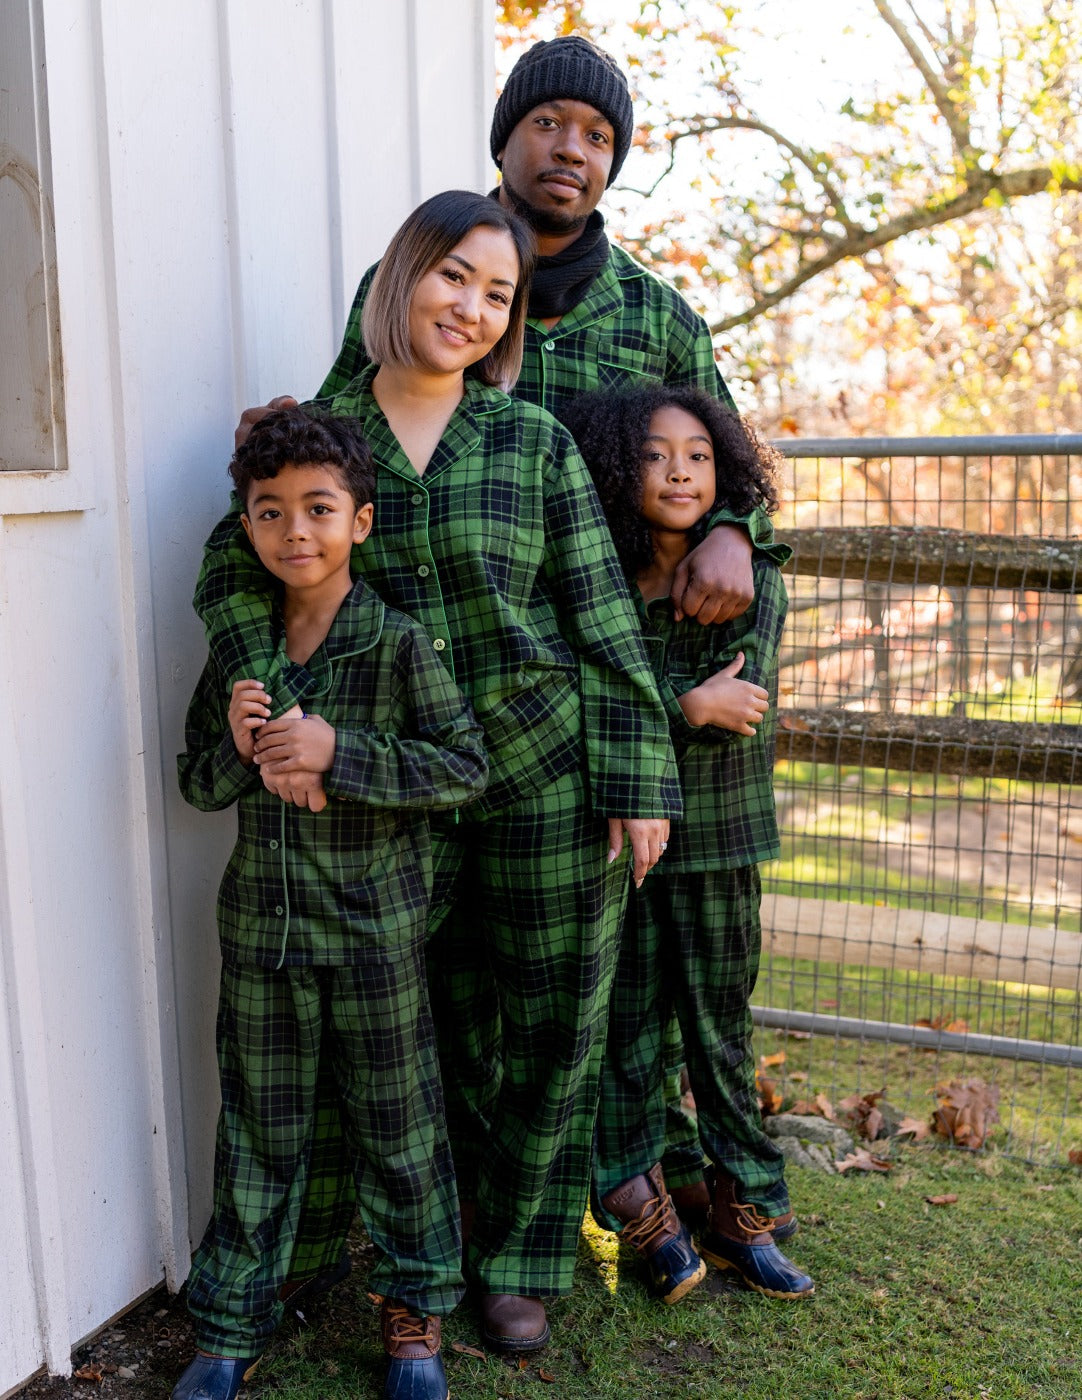 green and black plaid flannel women's pajama